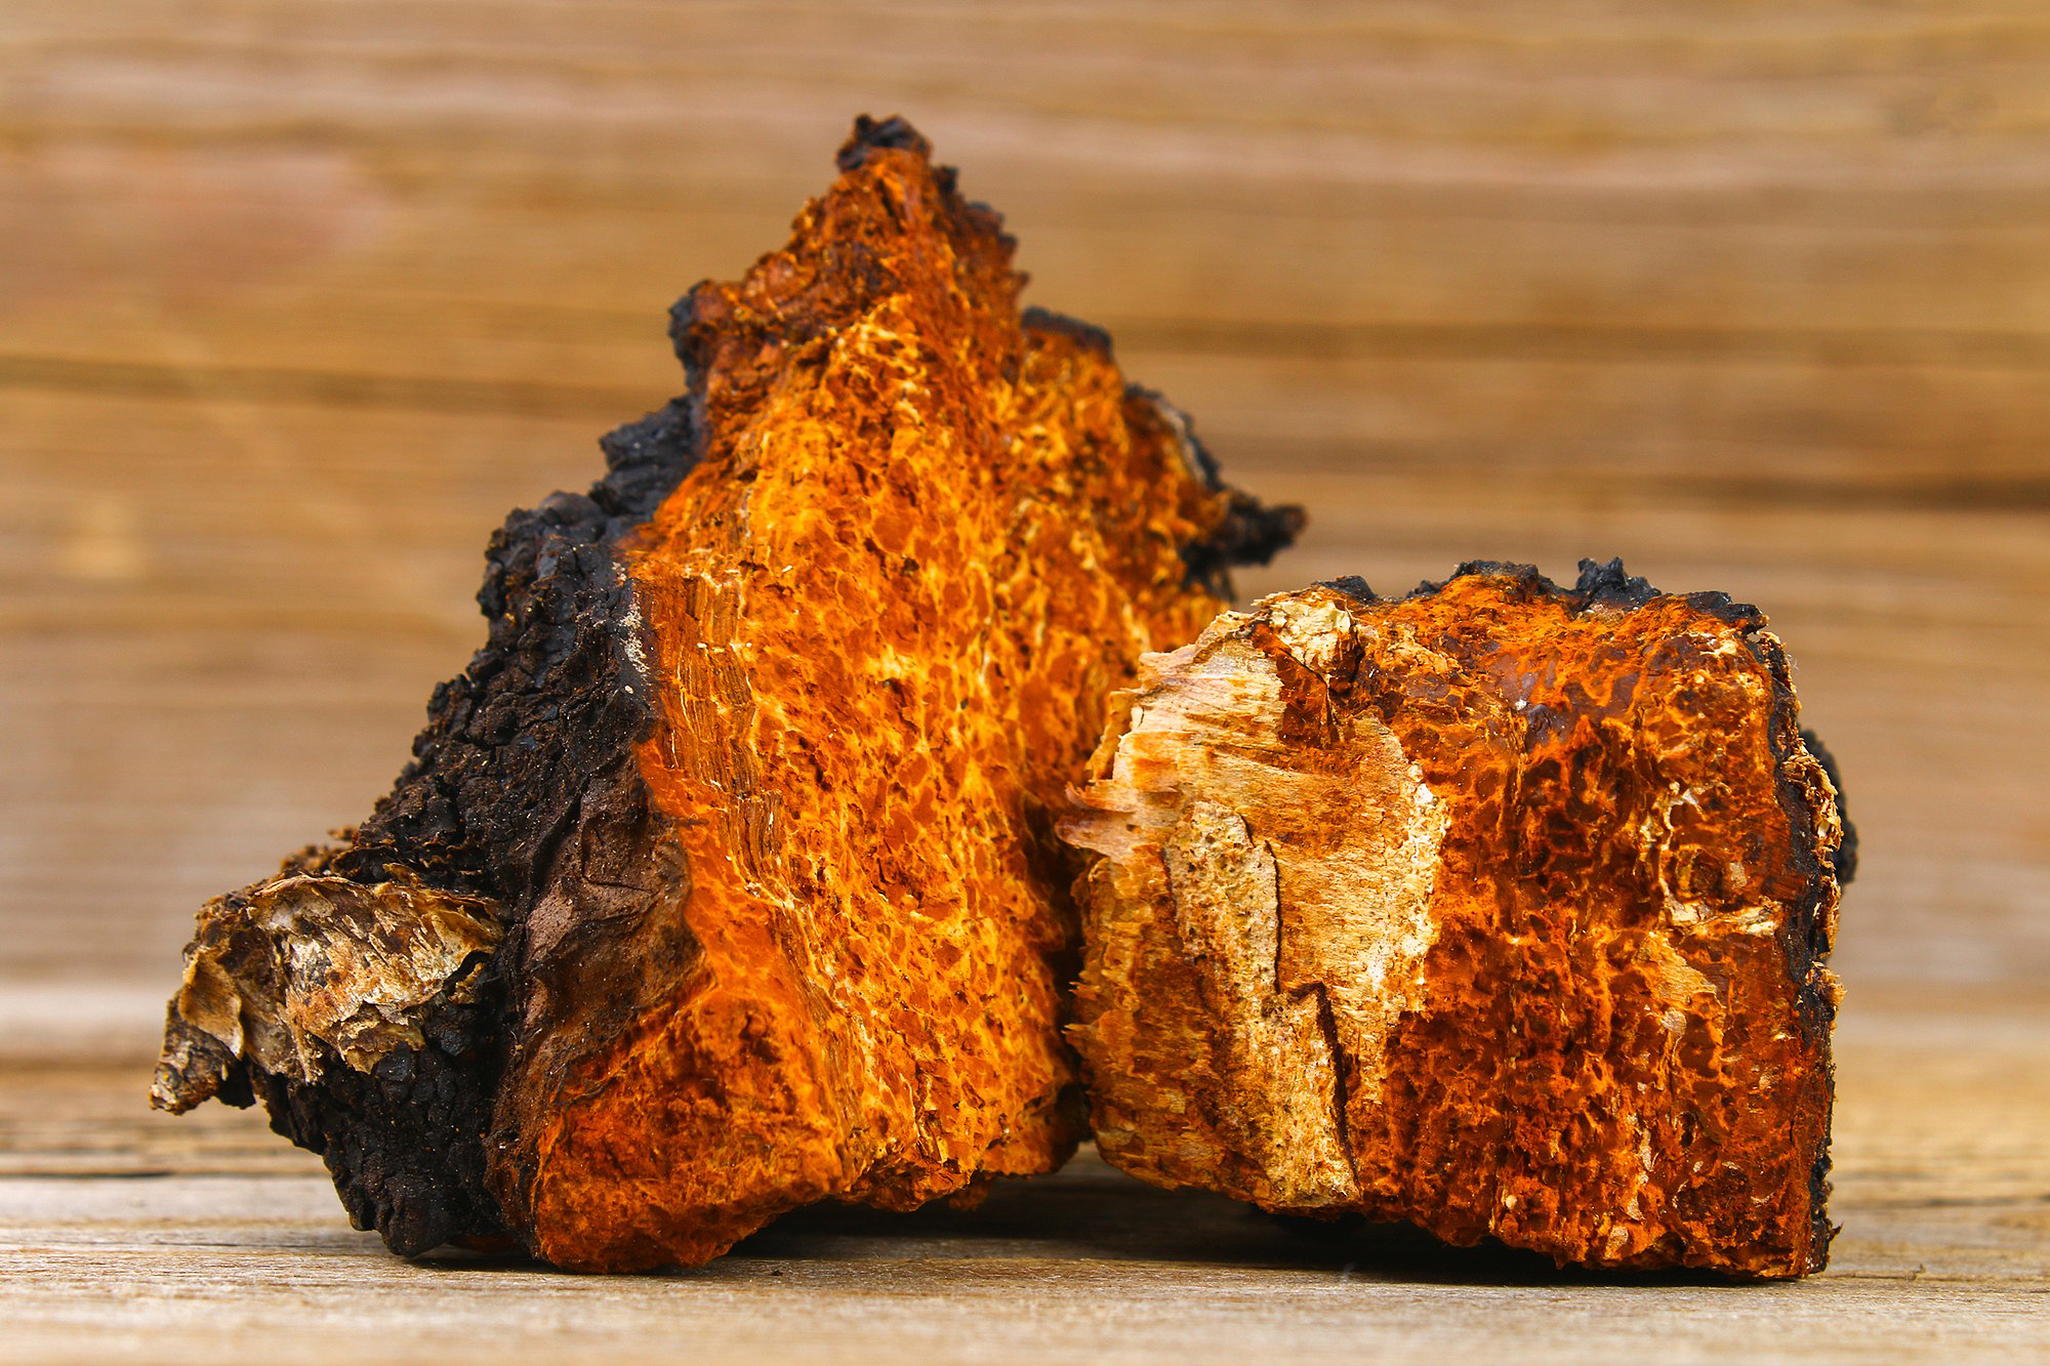 Chaga, a means to improve skin and hair